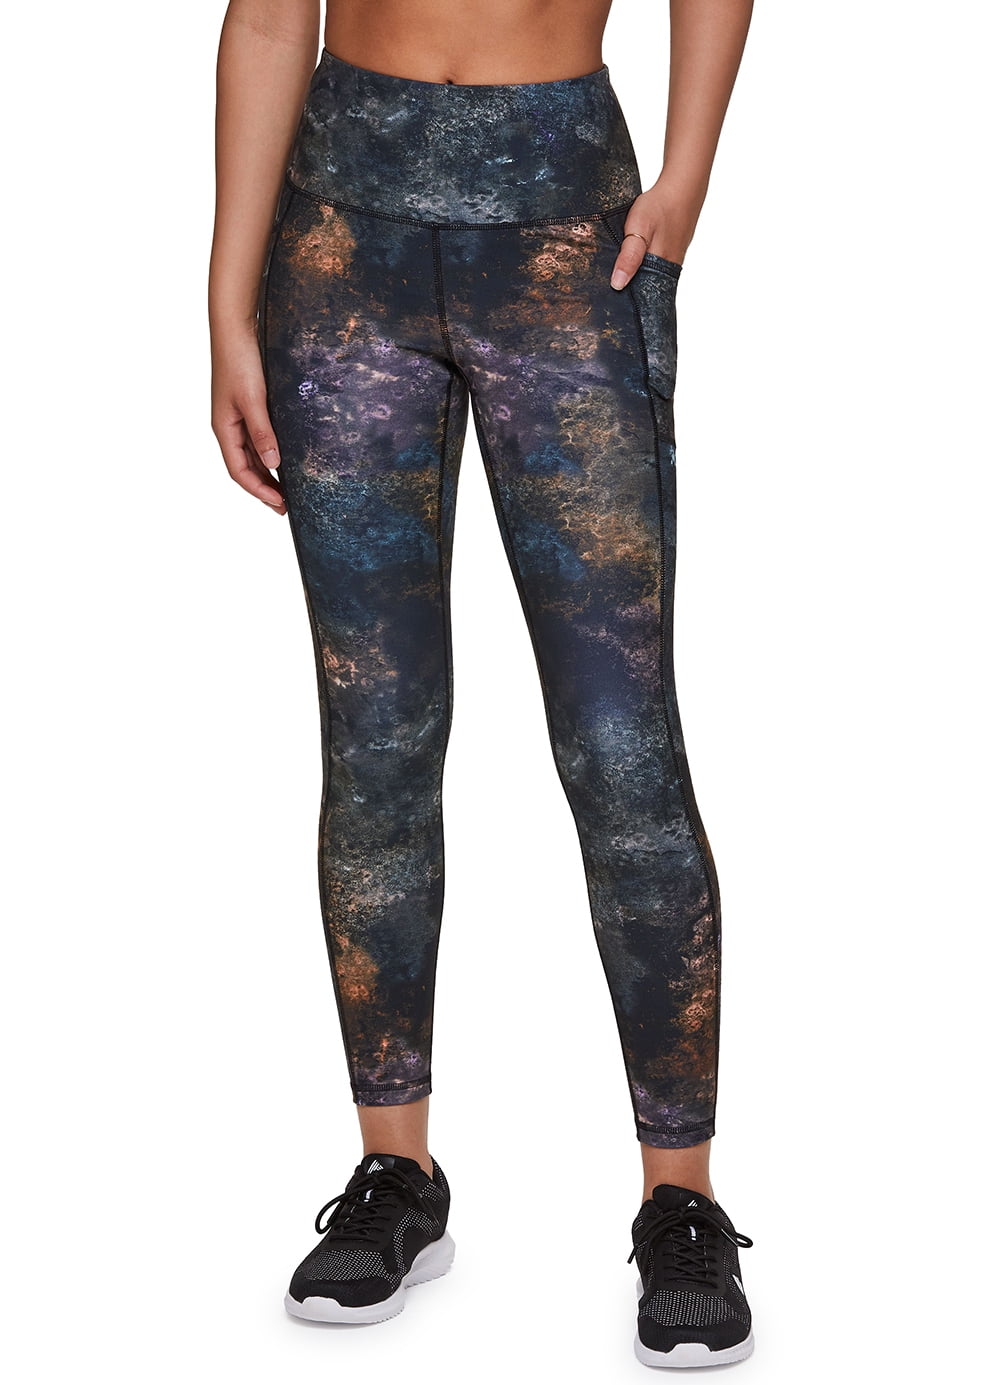 Bliv oppe Slip sko frill RBX Active Women's Athletic Ultra Soft Space Galaxy Legging With Pockets -  Walmart.com